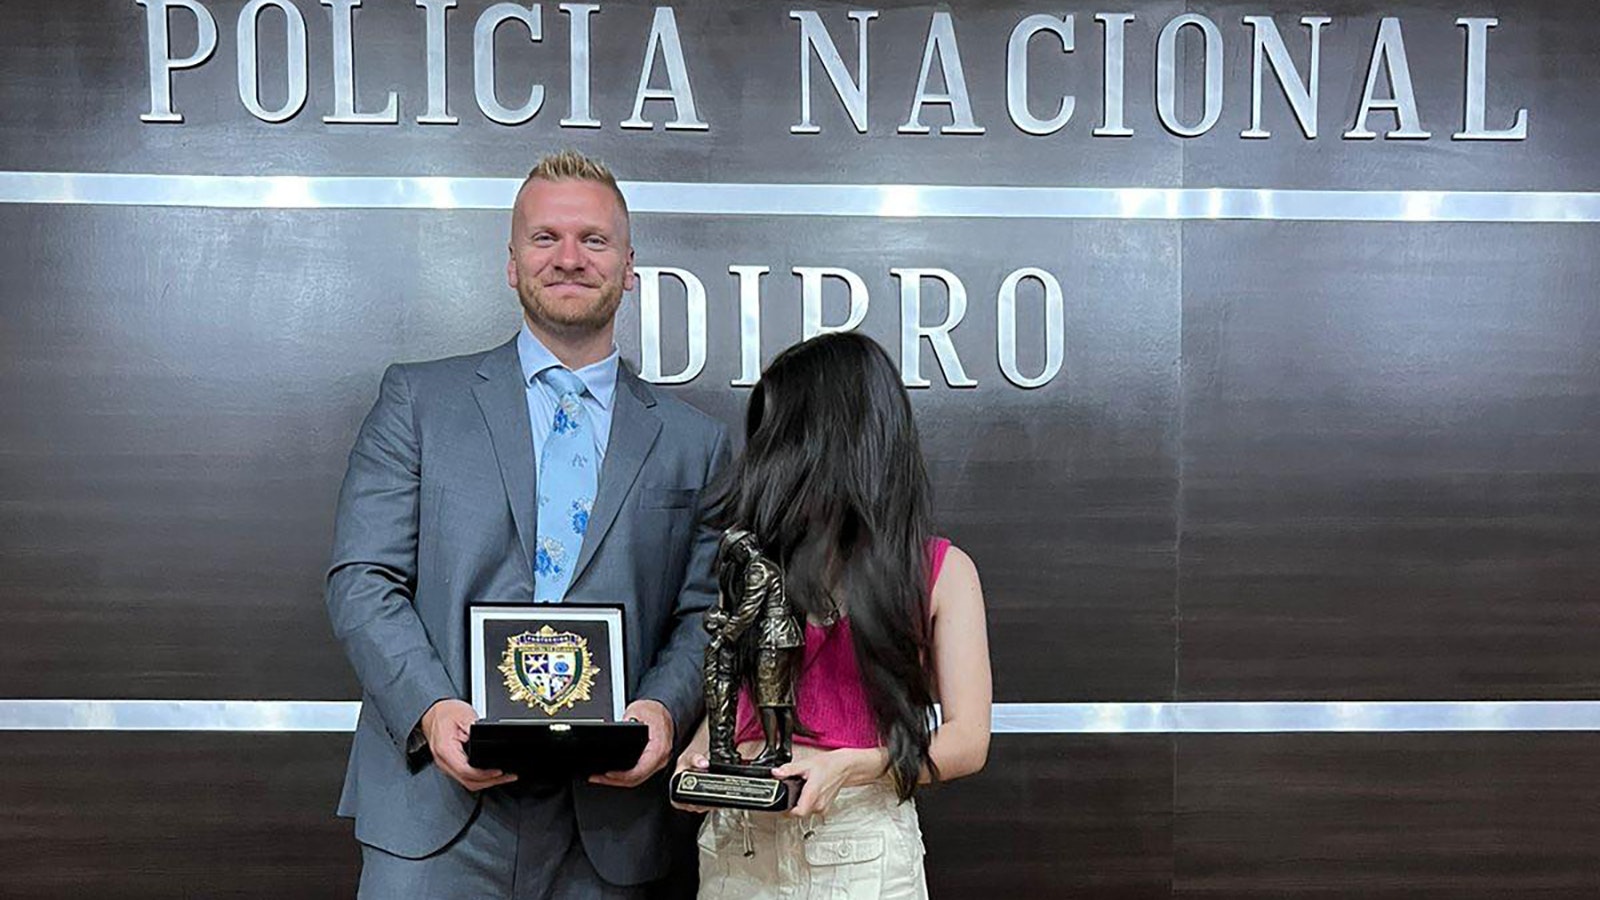 Last August, Schwab was awarded the prestigious "Shield of DIPRO" by the Colombian government for his work combating sex trafficking.